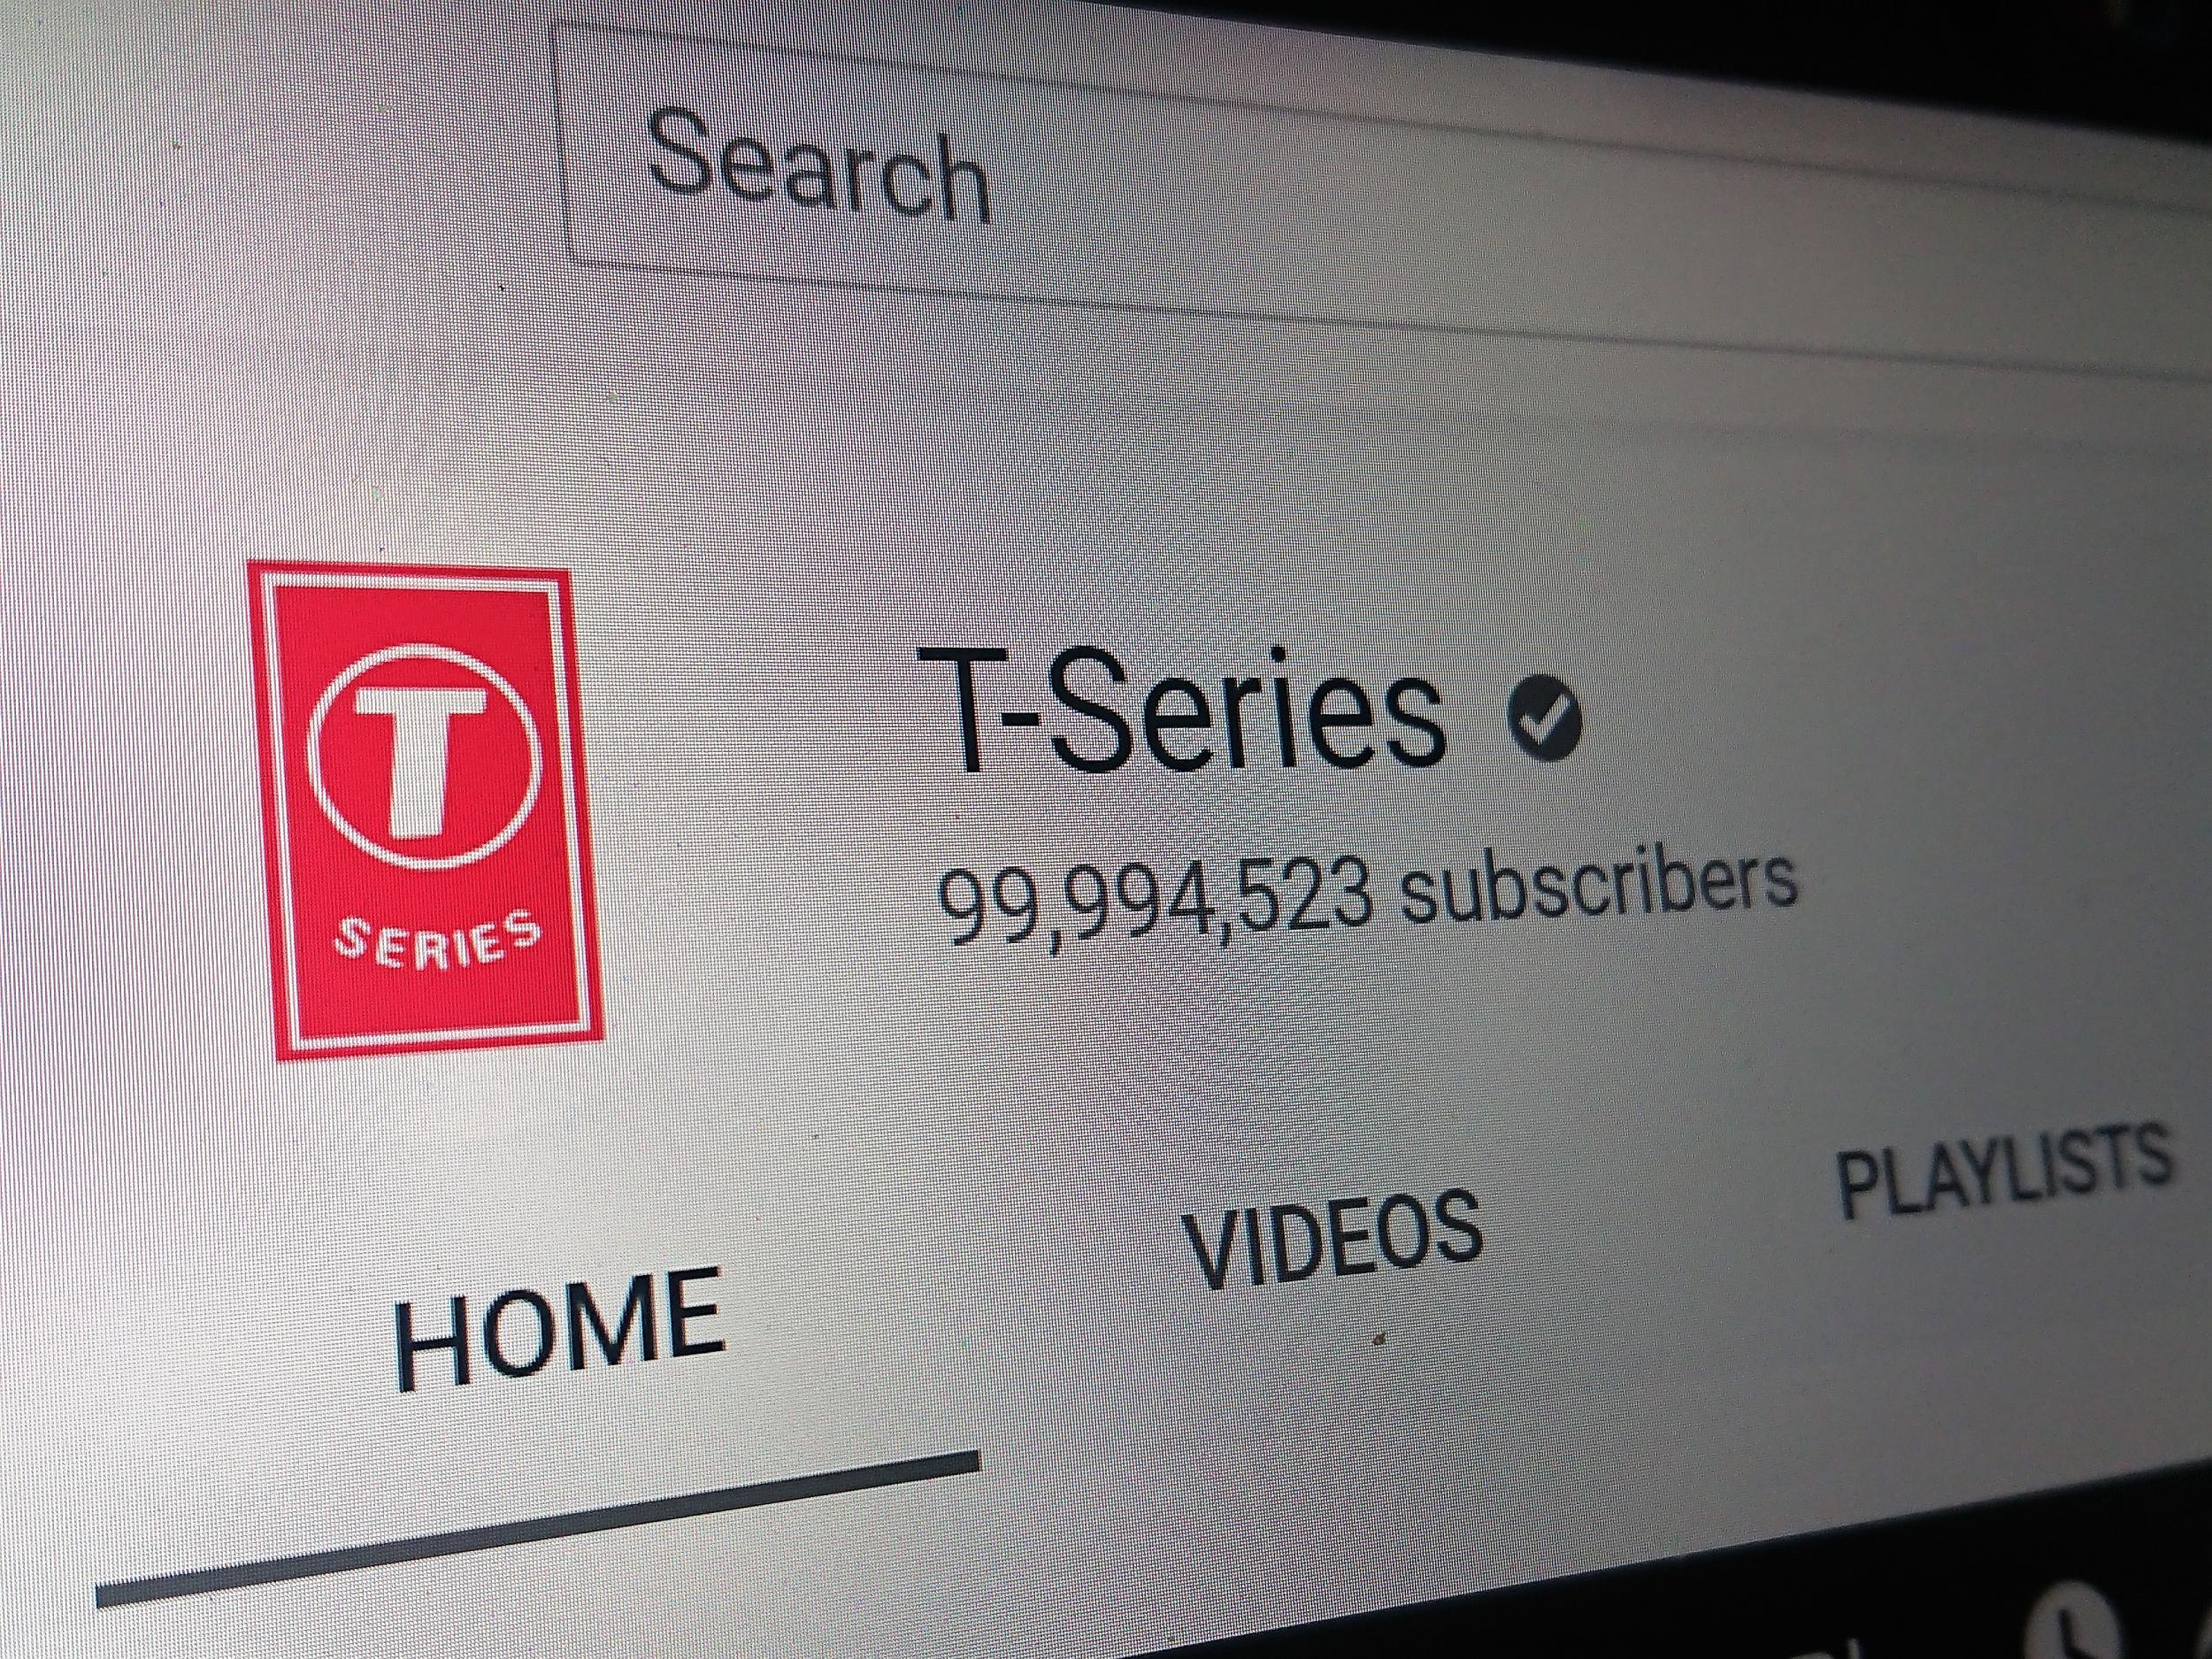 T-Series became the first YouTube channel to pass on 100 million subscribers on 29 May, 2019